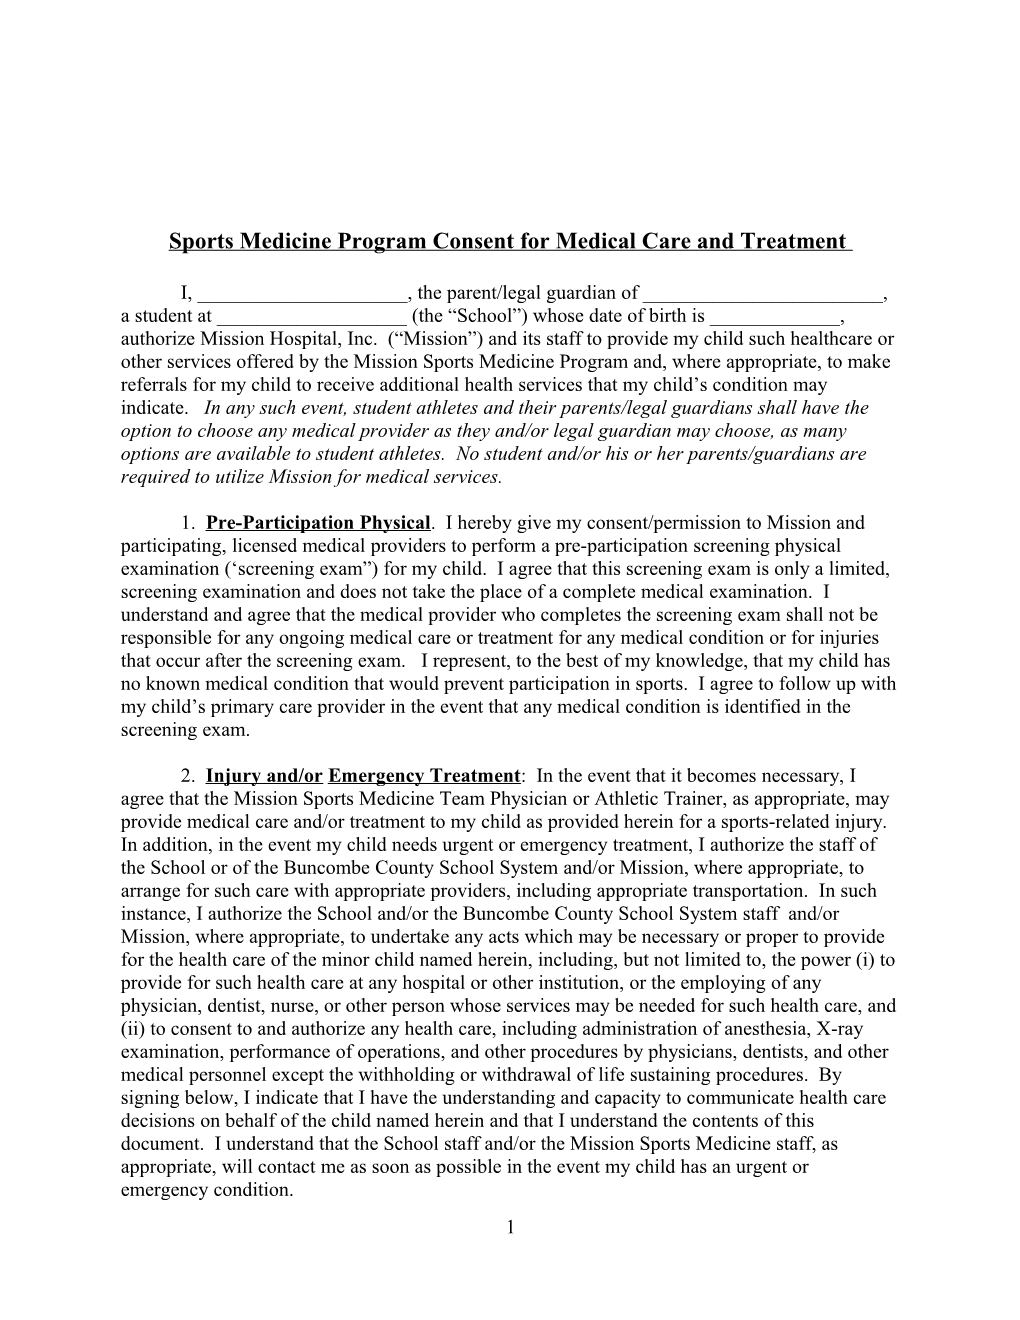 Sports Medicine Program Consent for Medical Care and Treatment